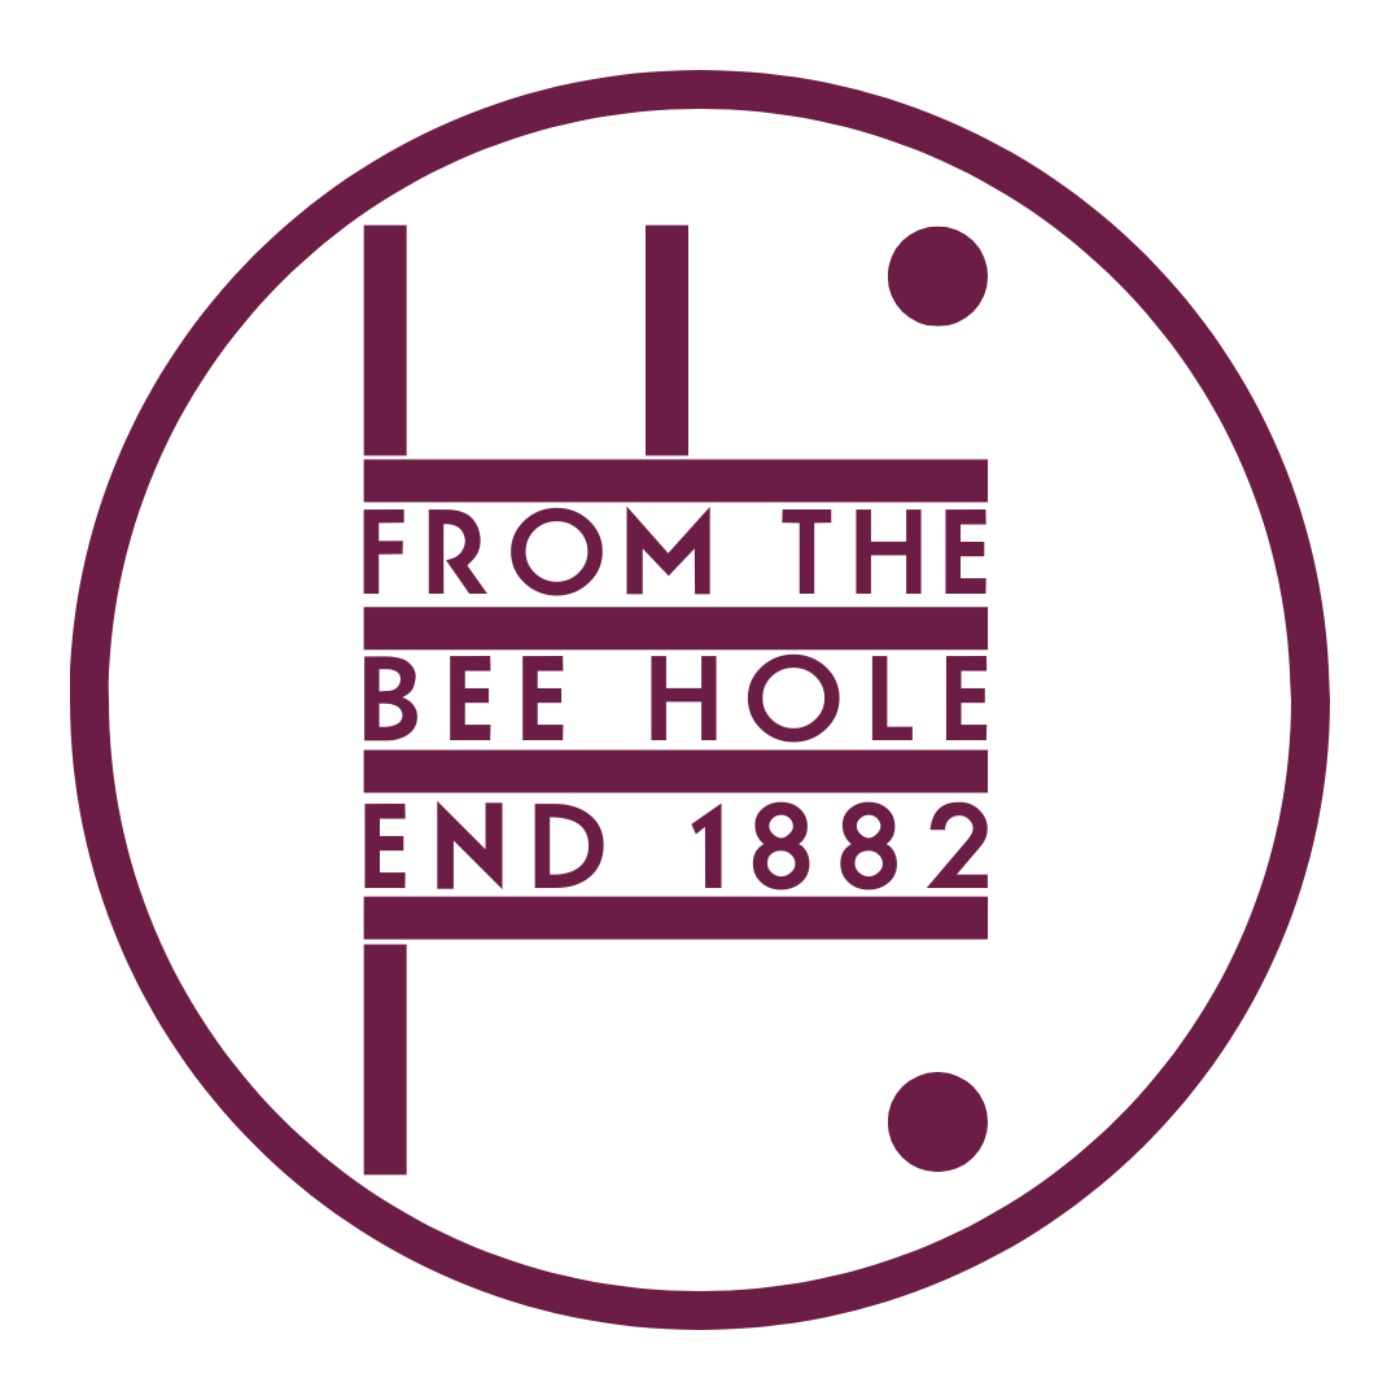 From the Bee Hole End - The Debrief - Wolves